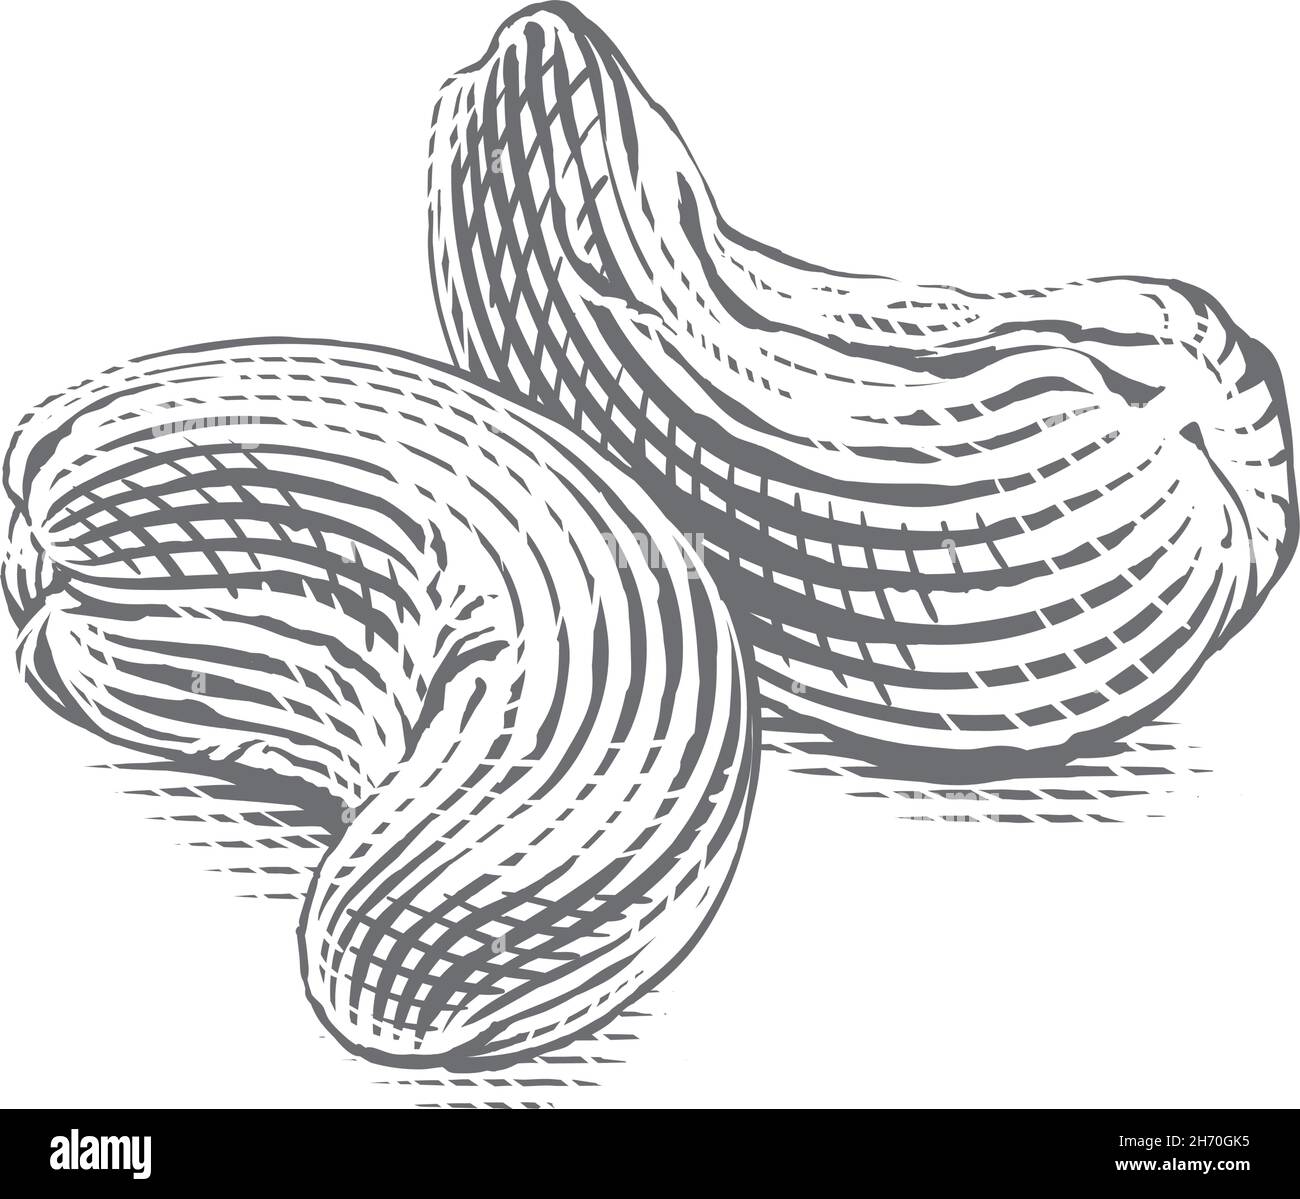 cashew Hand drawing sketch engraving illustration style Stock Vector